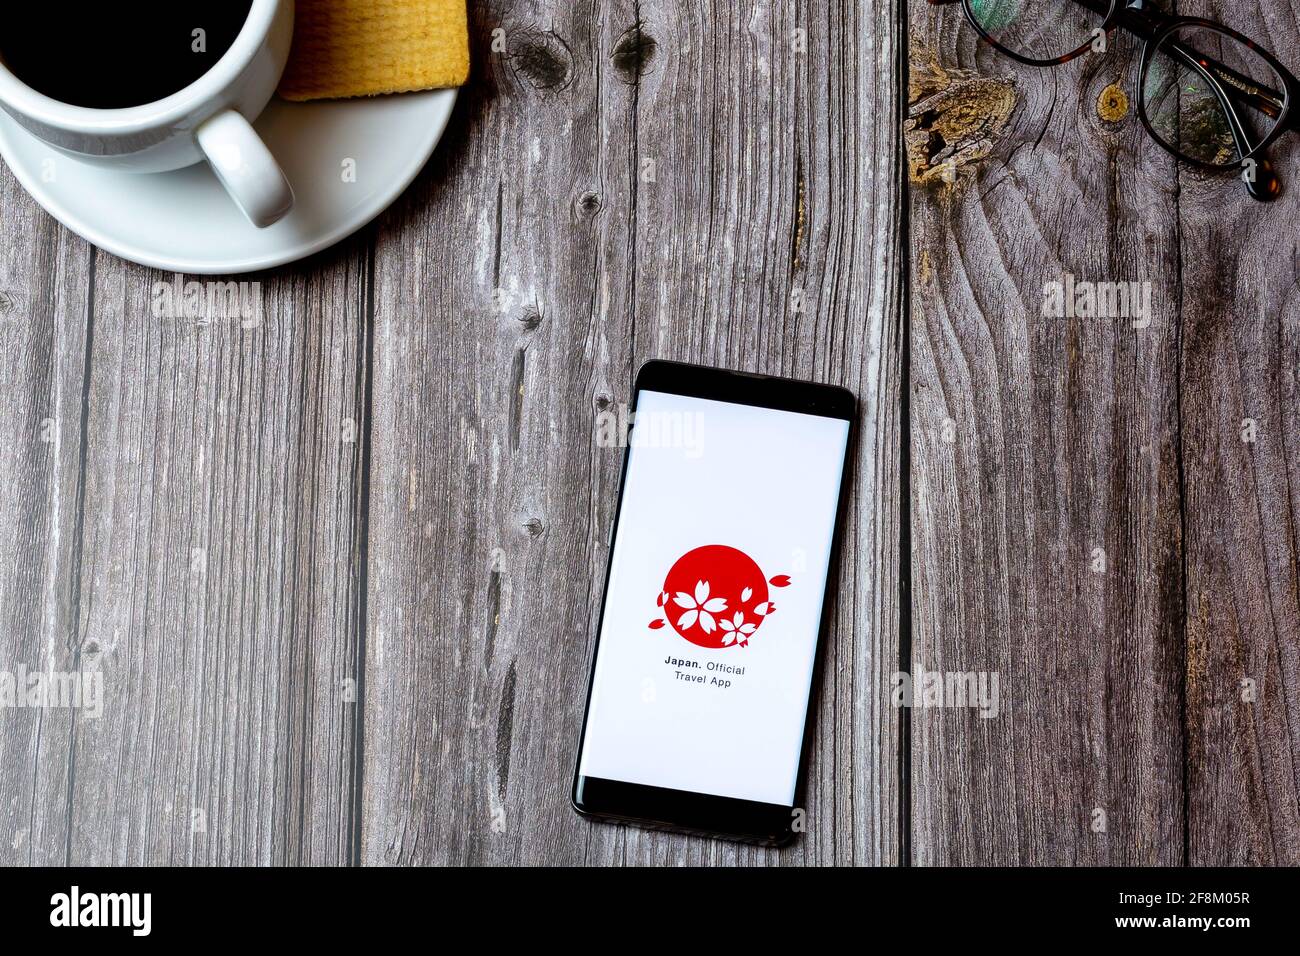 A Mobile phone or cell phone laid on a wooden table showing the japan official travel app on screen Stock Photo